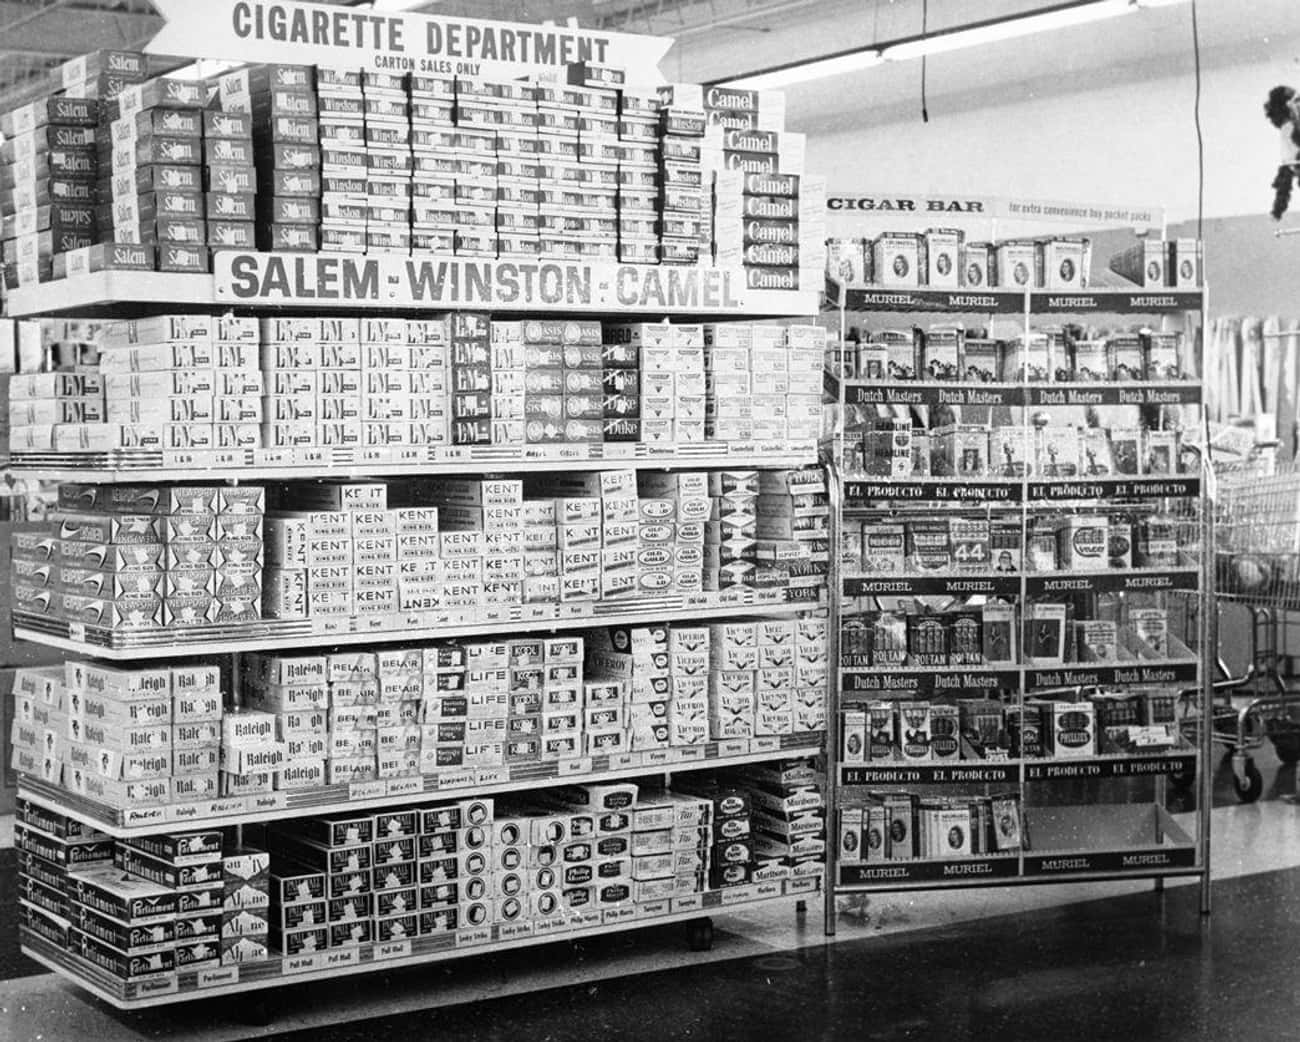 Cigarette End Cap At A Grocery Store, 1962